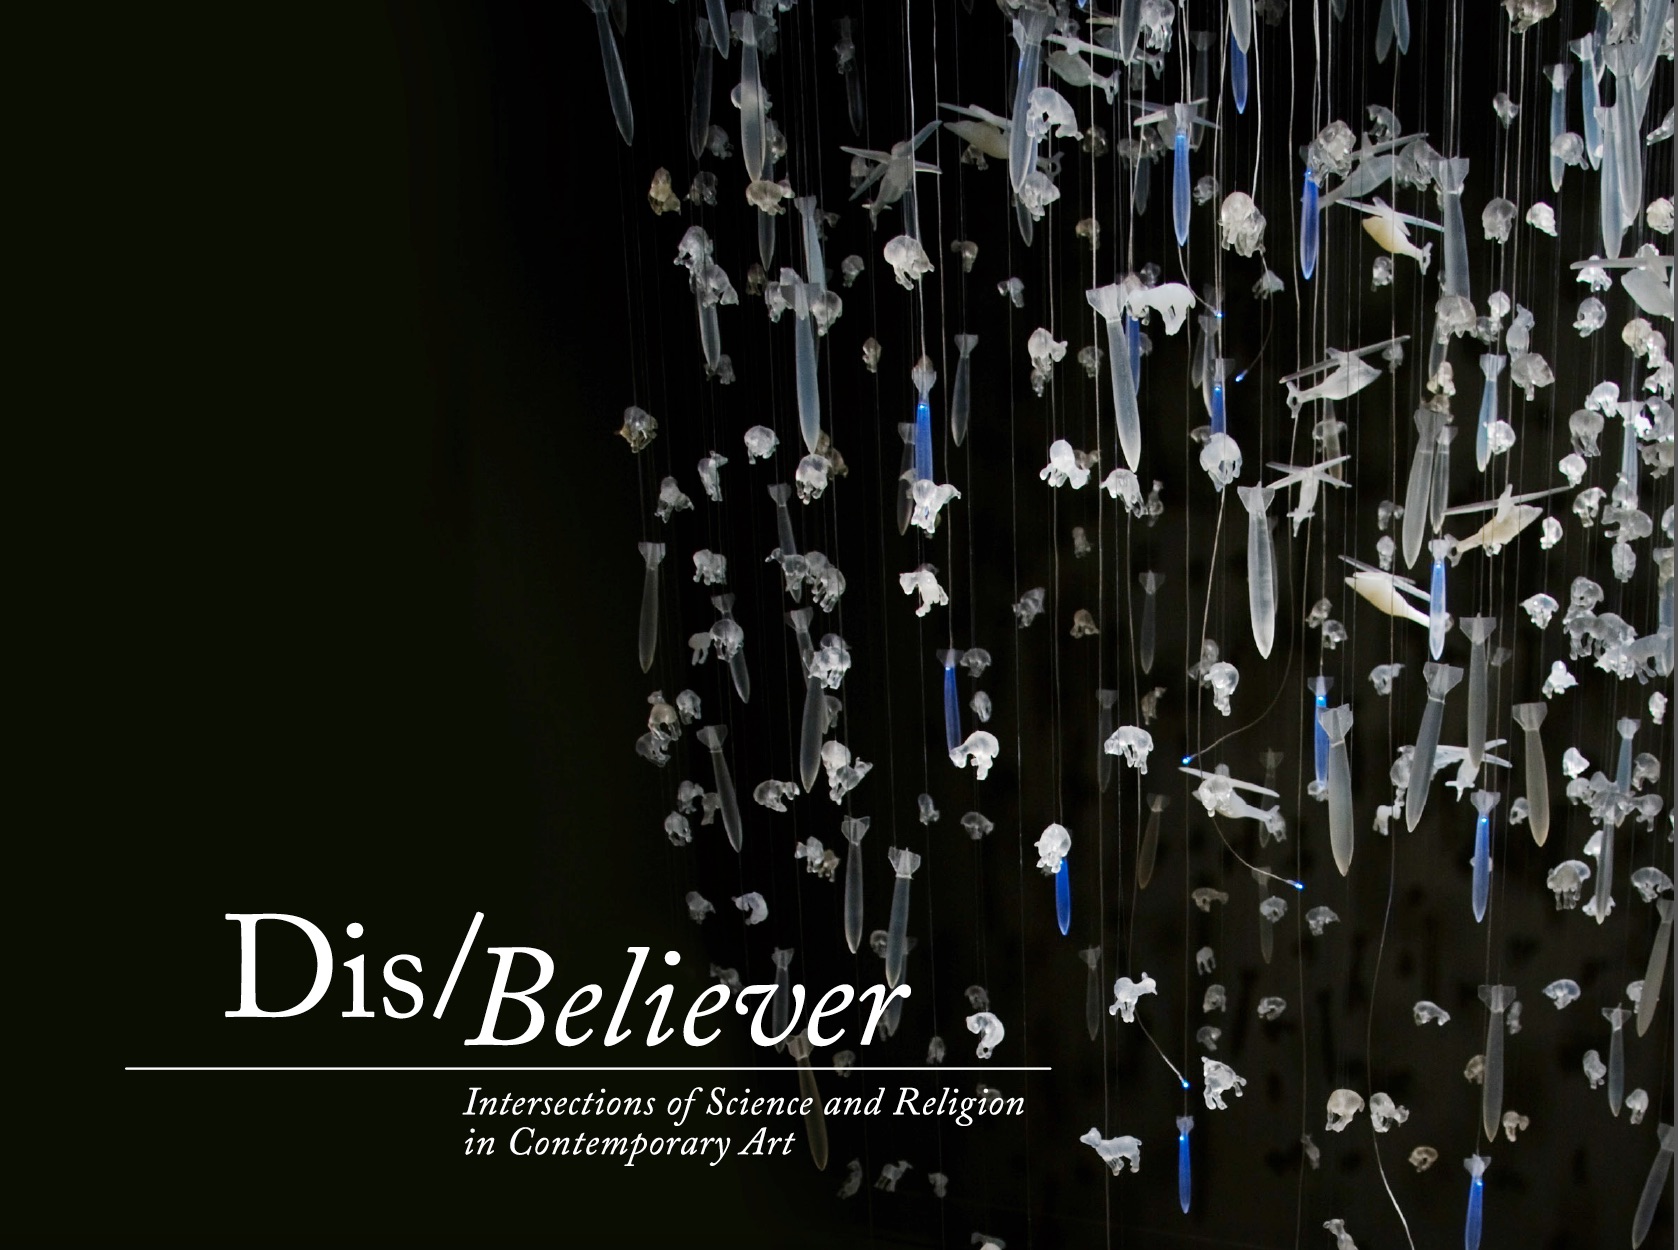    Dis/Believer: Intersections of Science and Religion in Contemporary Art   